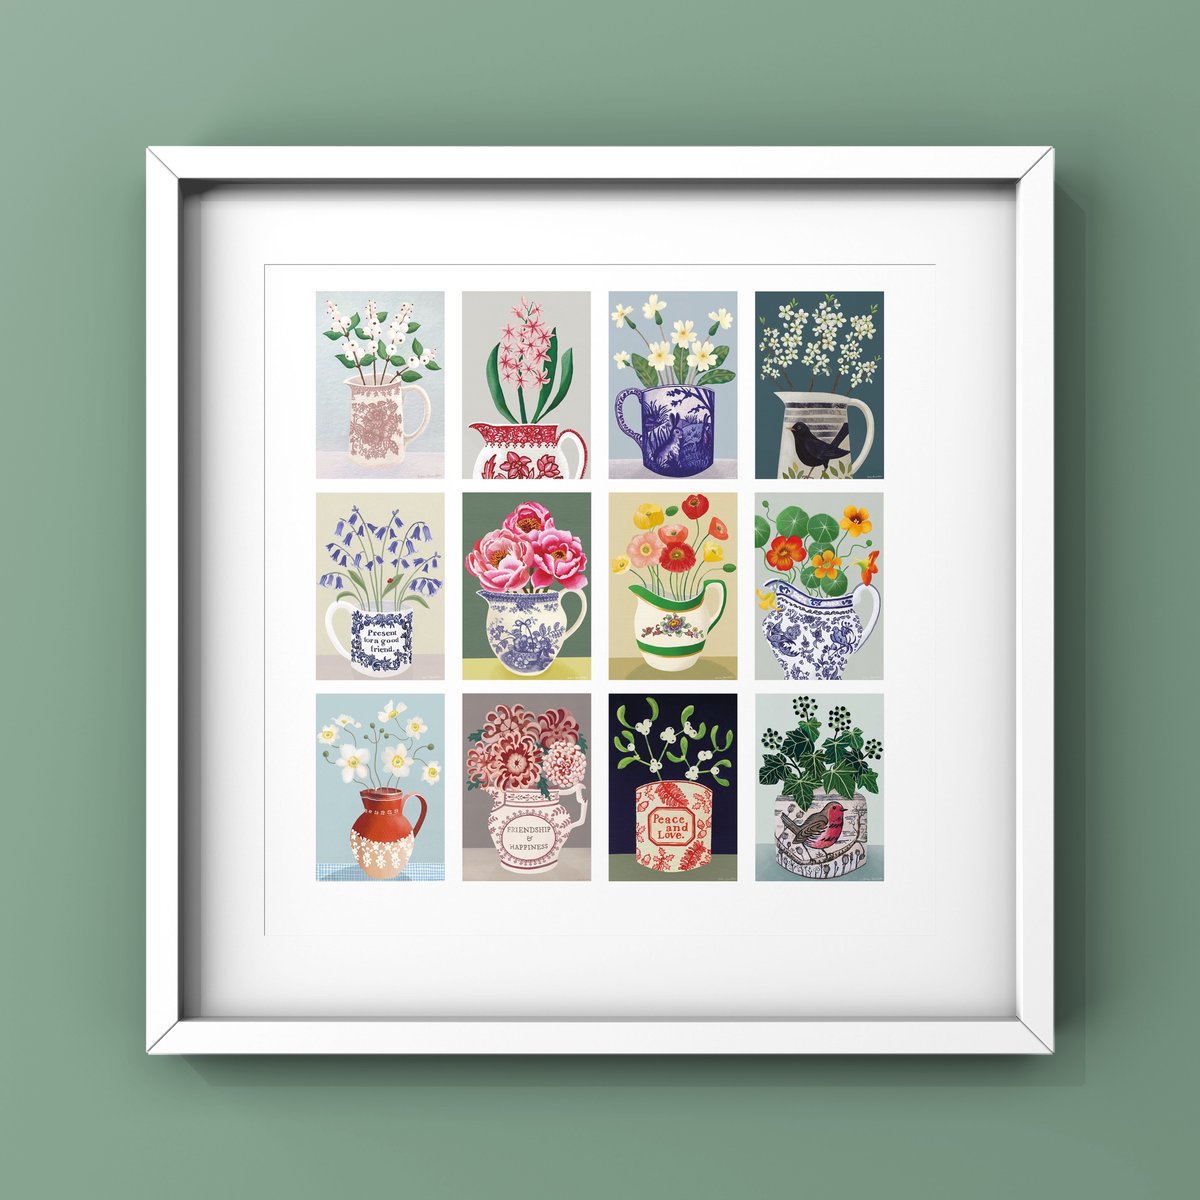 NEW: A Year in the Garden Limited Edition Print